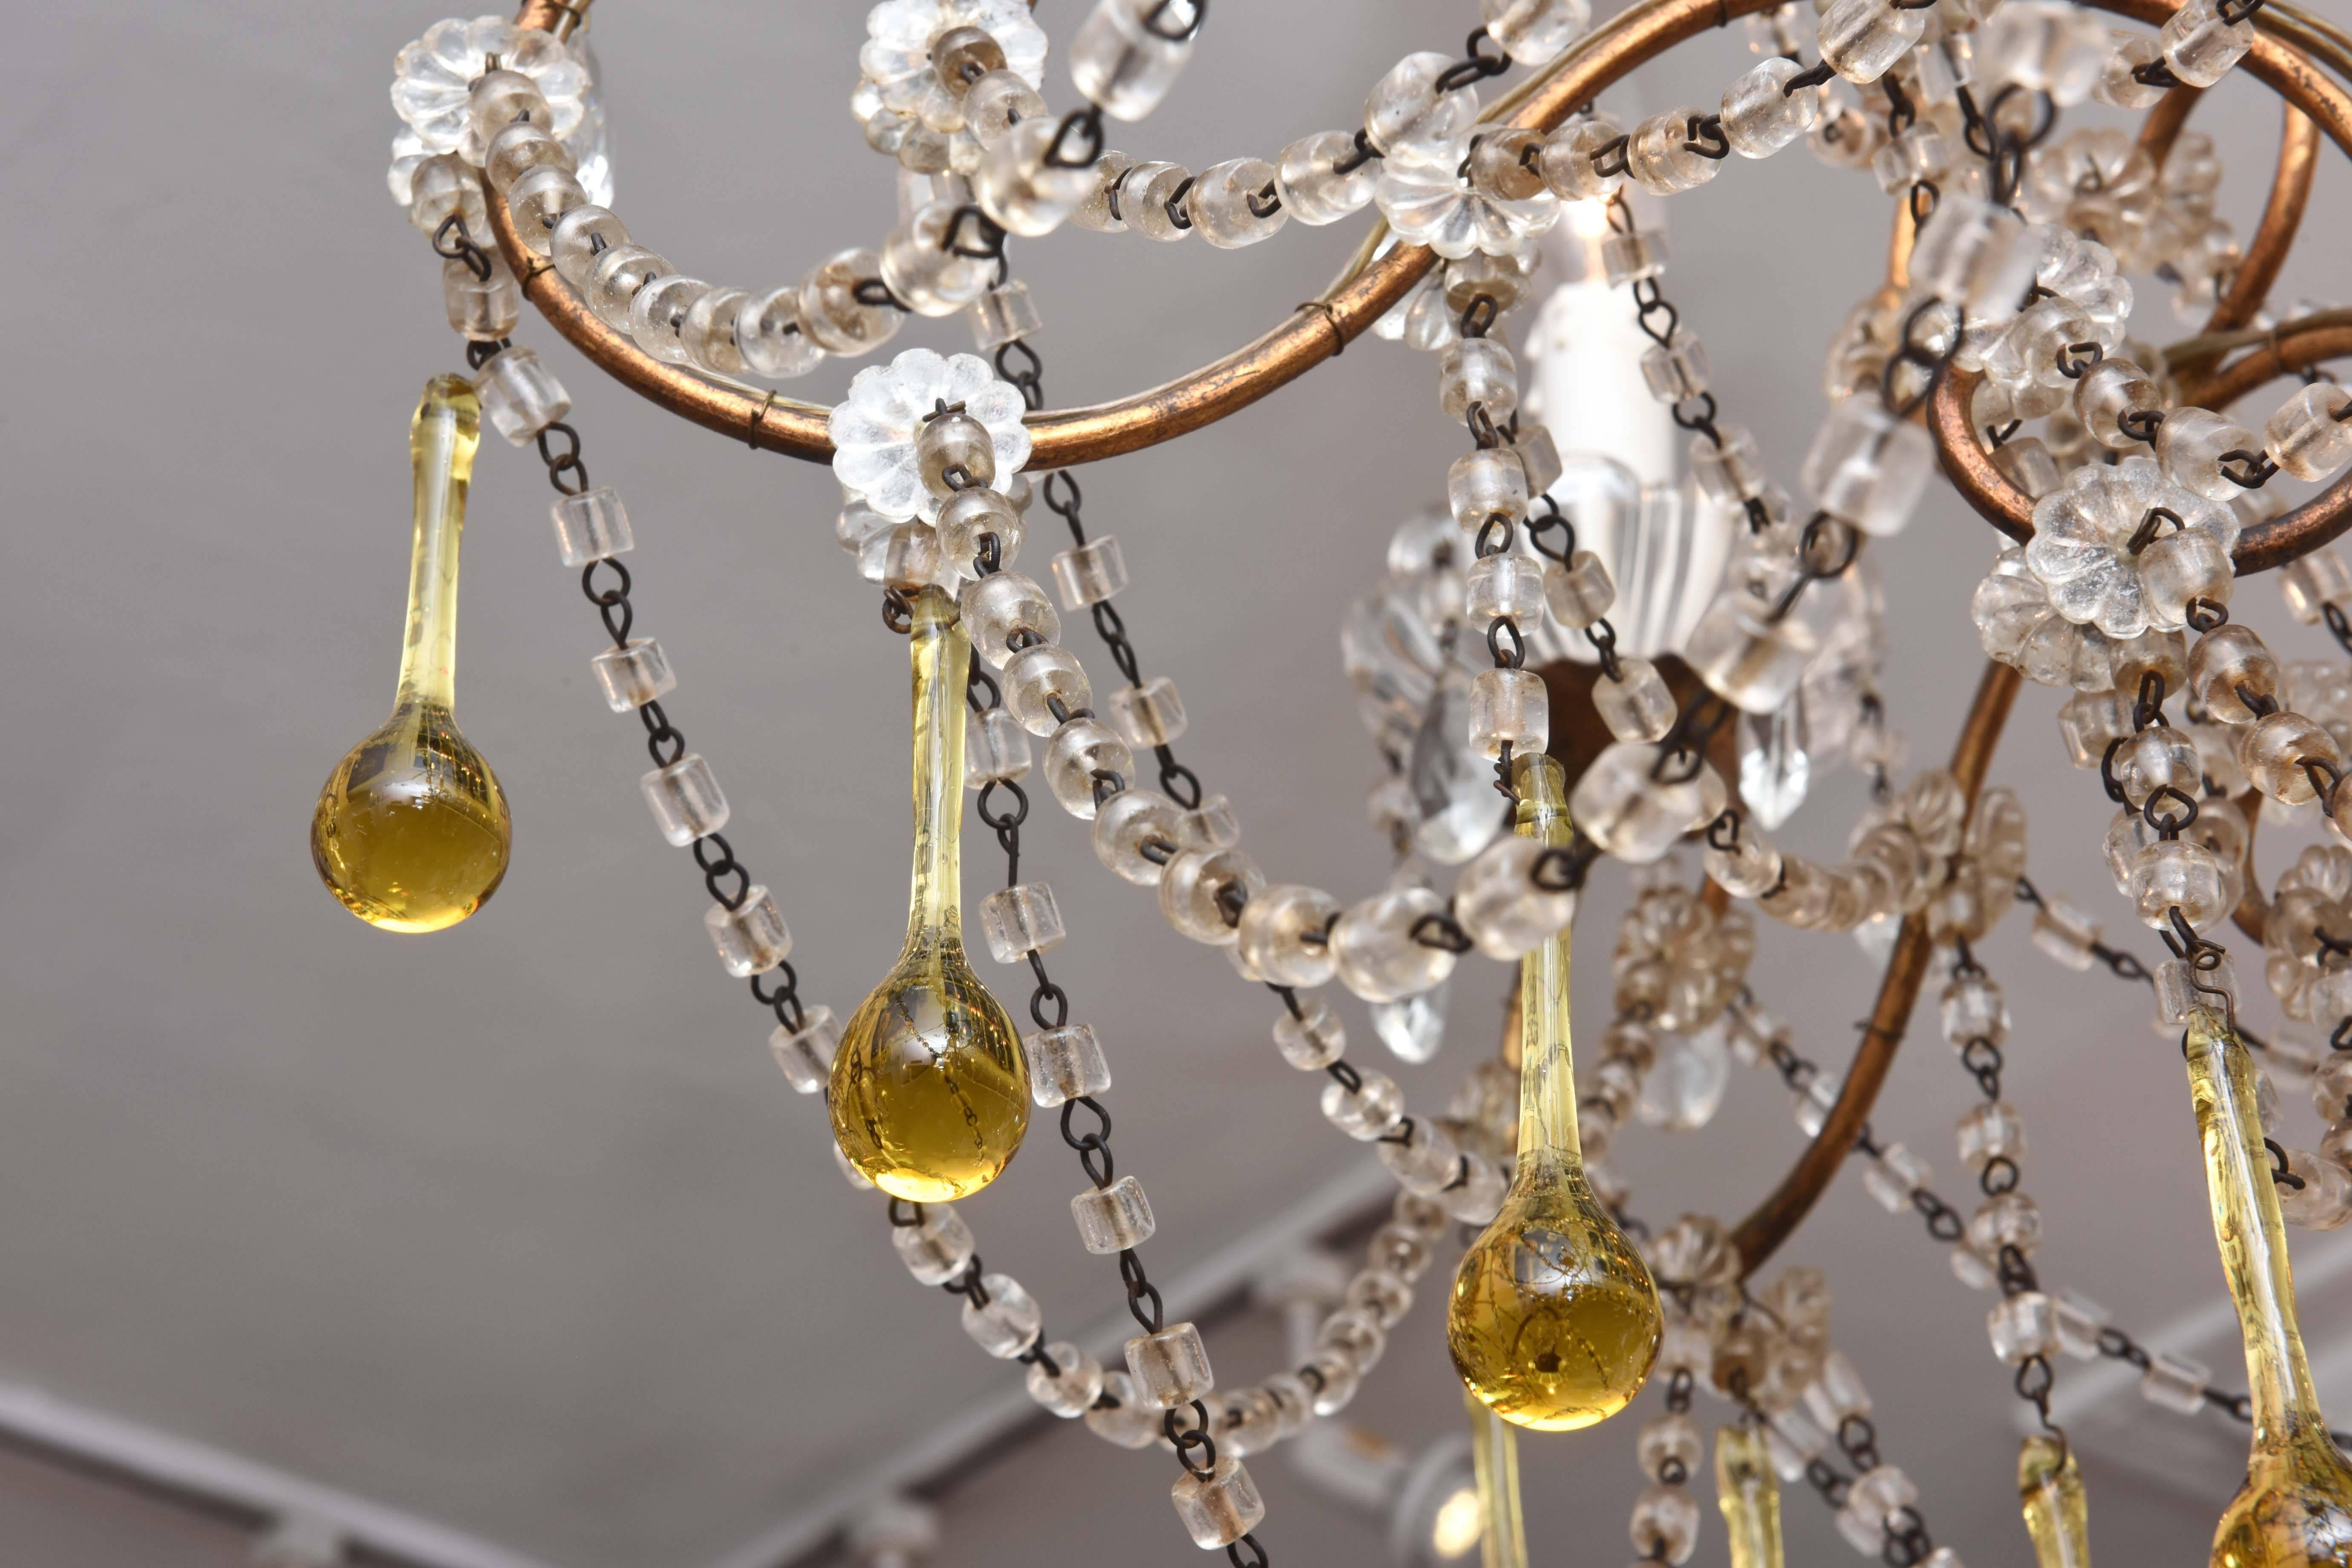 Hand-Crafted Vintage Venetian Glass and Gilt Metal Chandelier